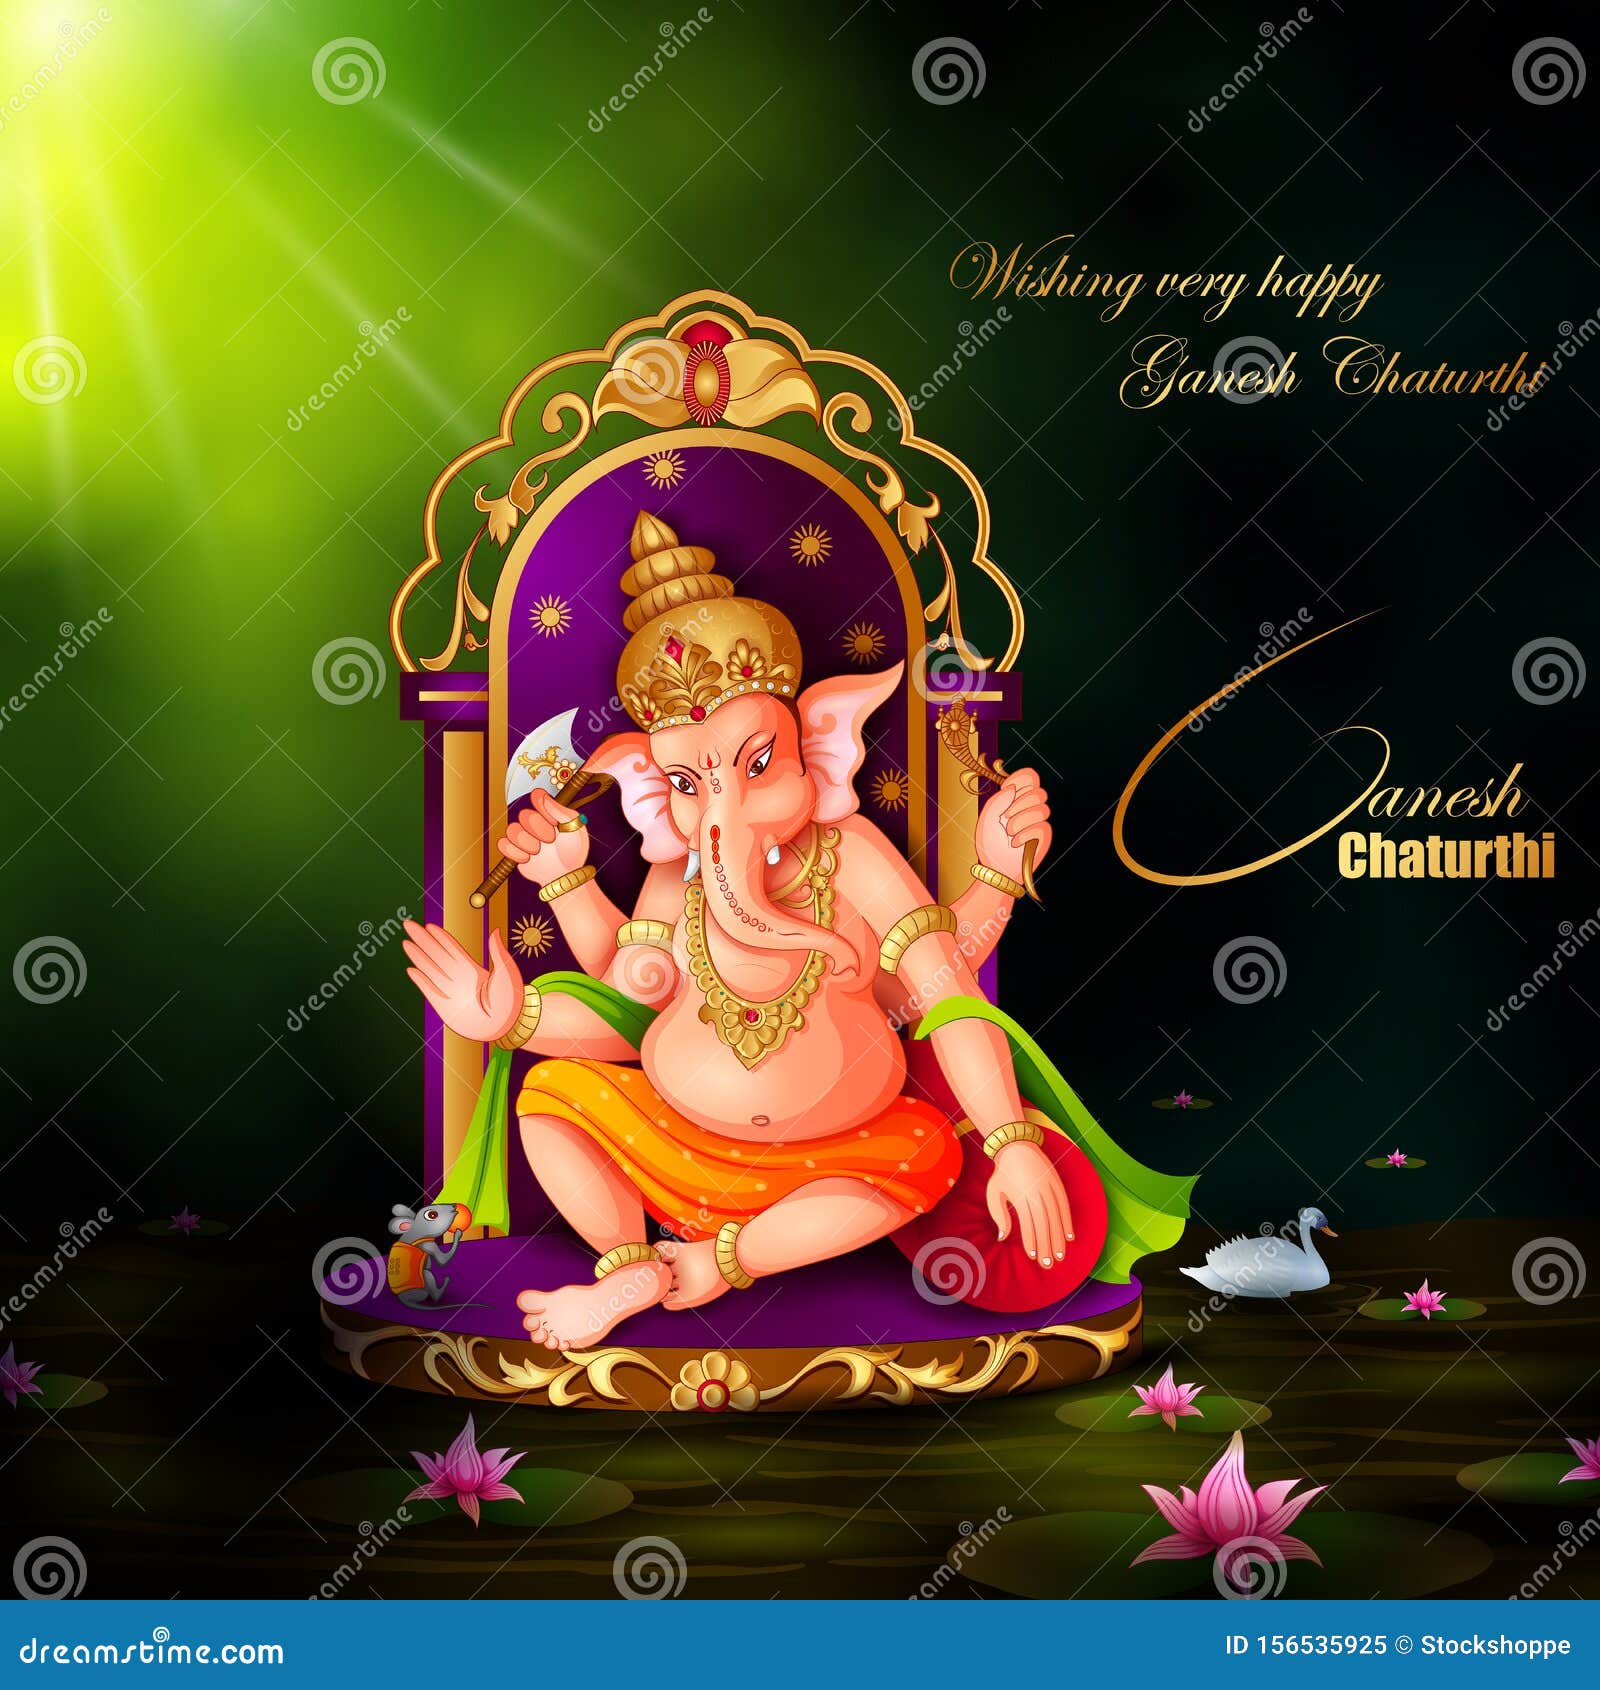 Lord Ganapati for Happy Ganesh Chaturthi Festival Religious Banner  Background Stock Vector - Illustration of deepawali, deity: 156535925